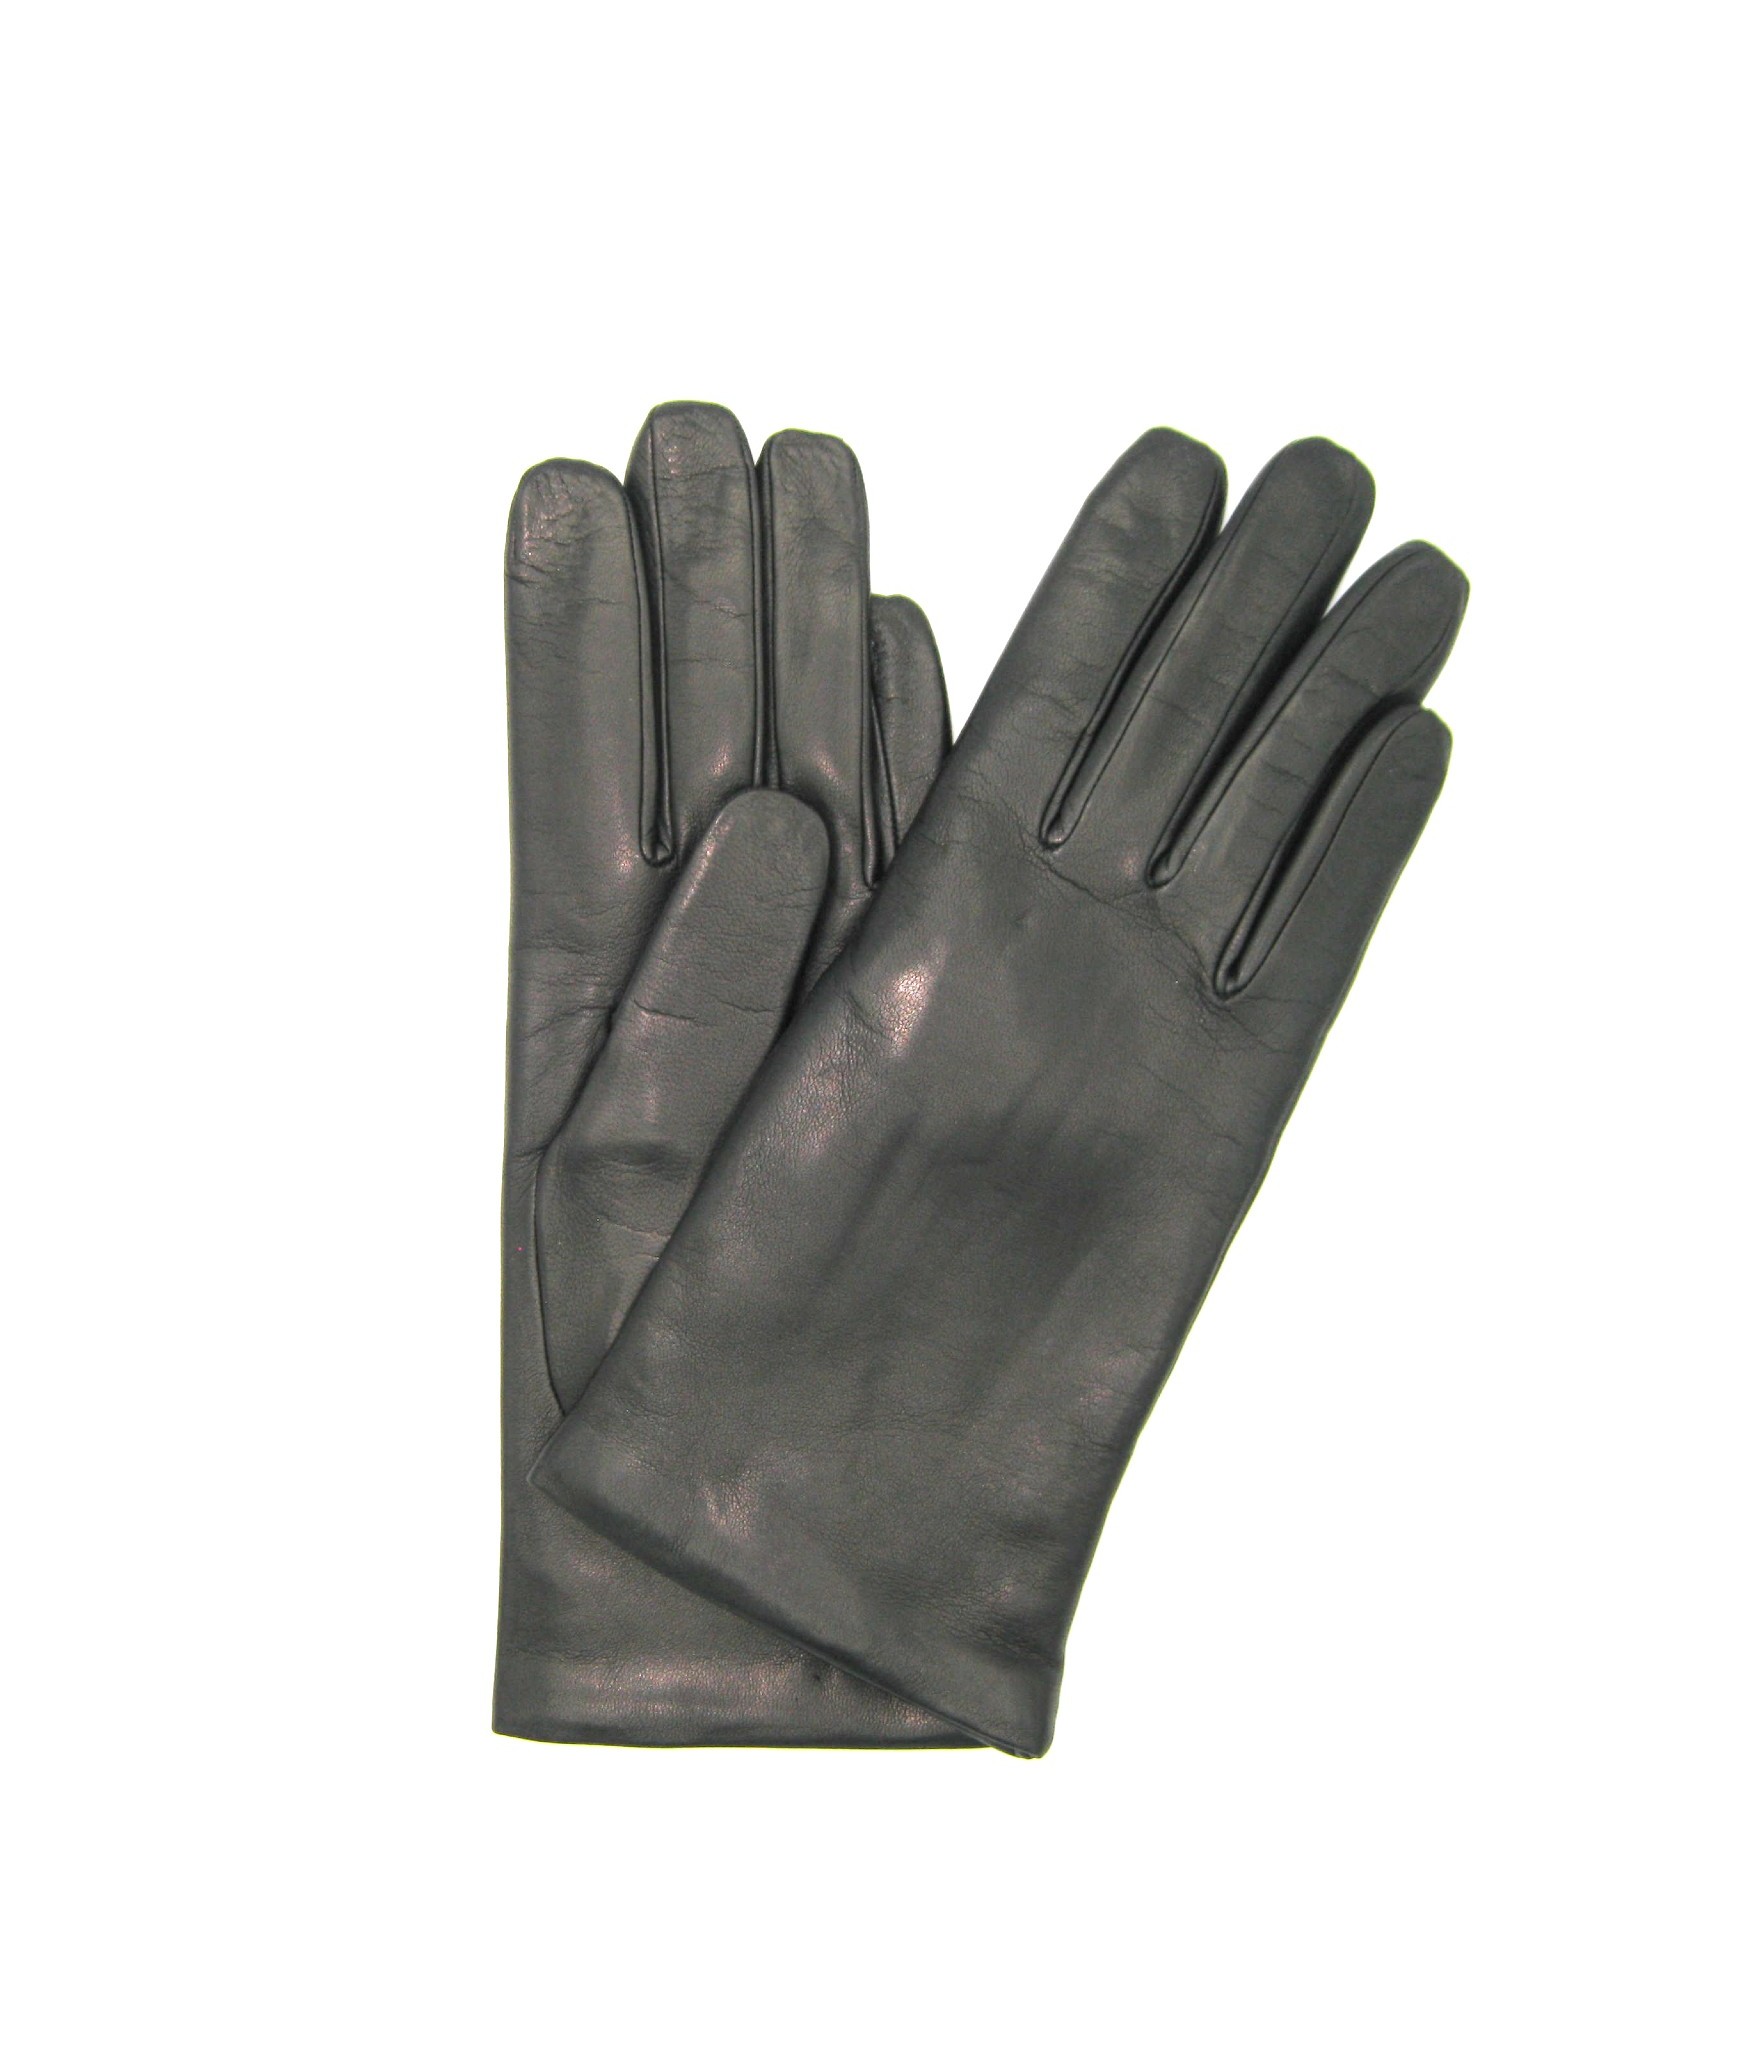 Nappa leather gloves  Cashmere lined   Black